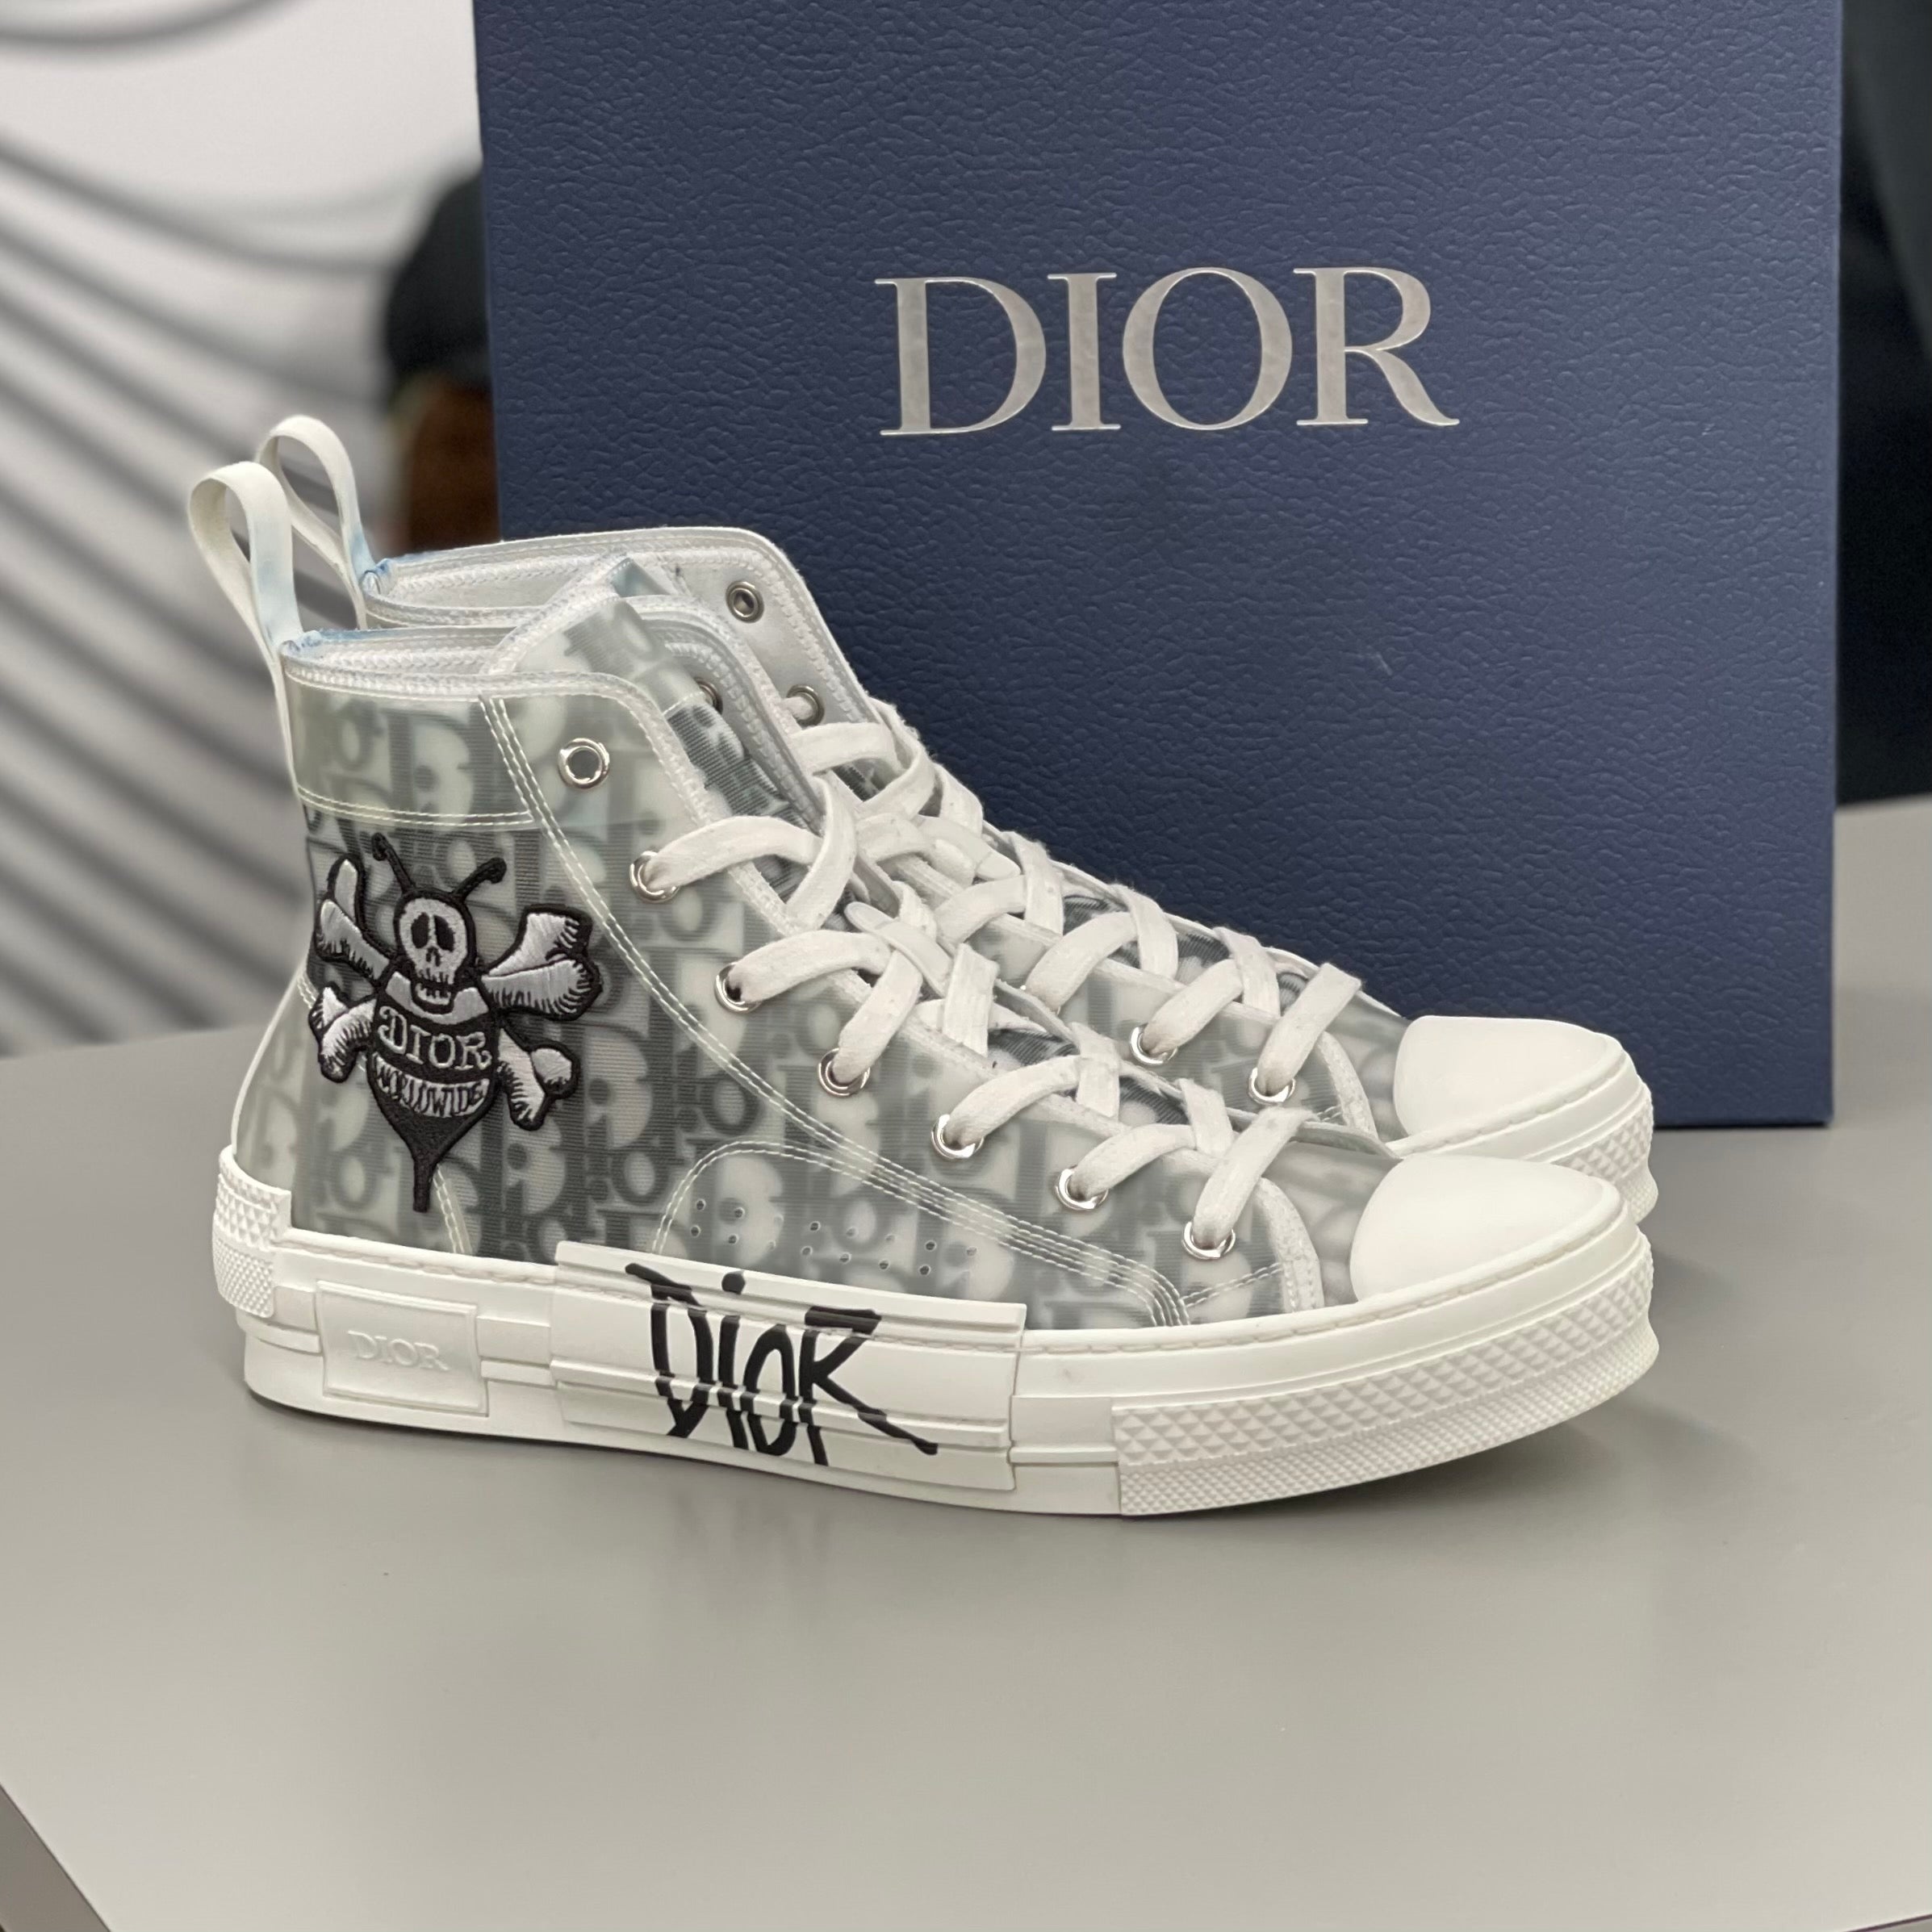 Dior B23 “Bee Embroidery”